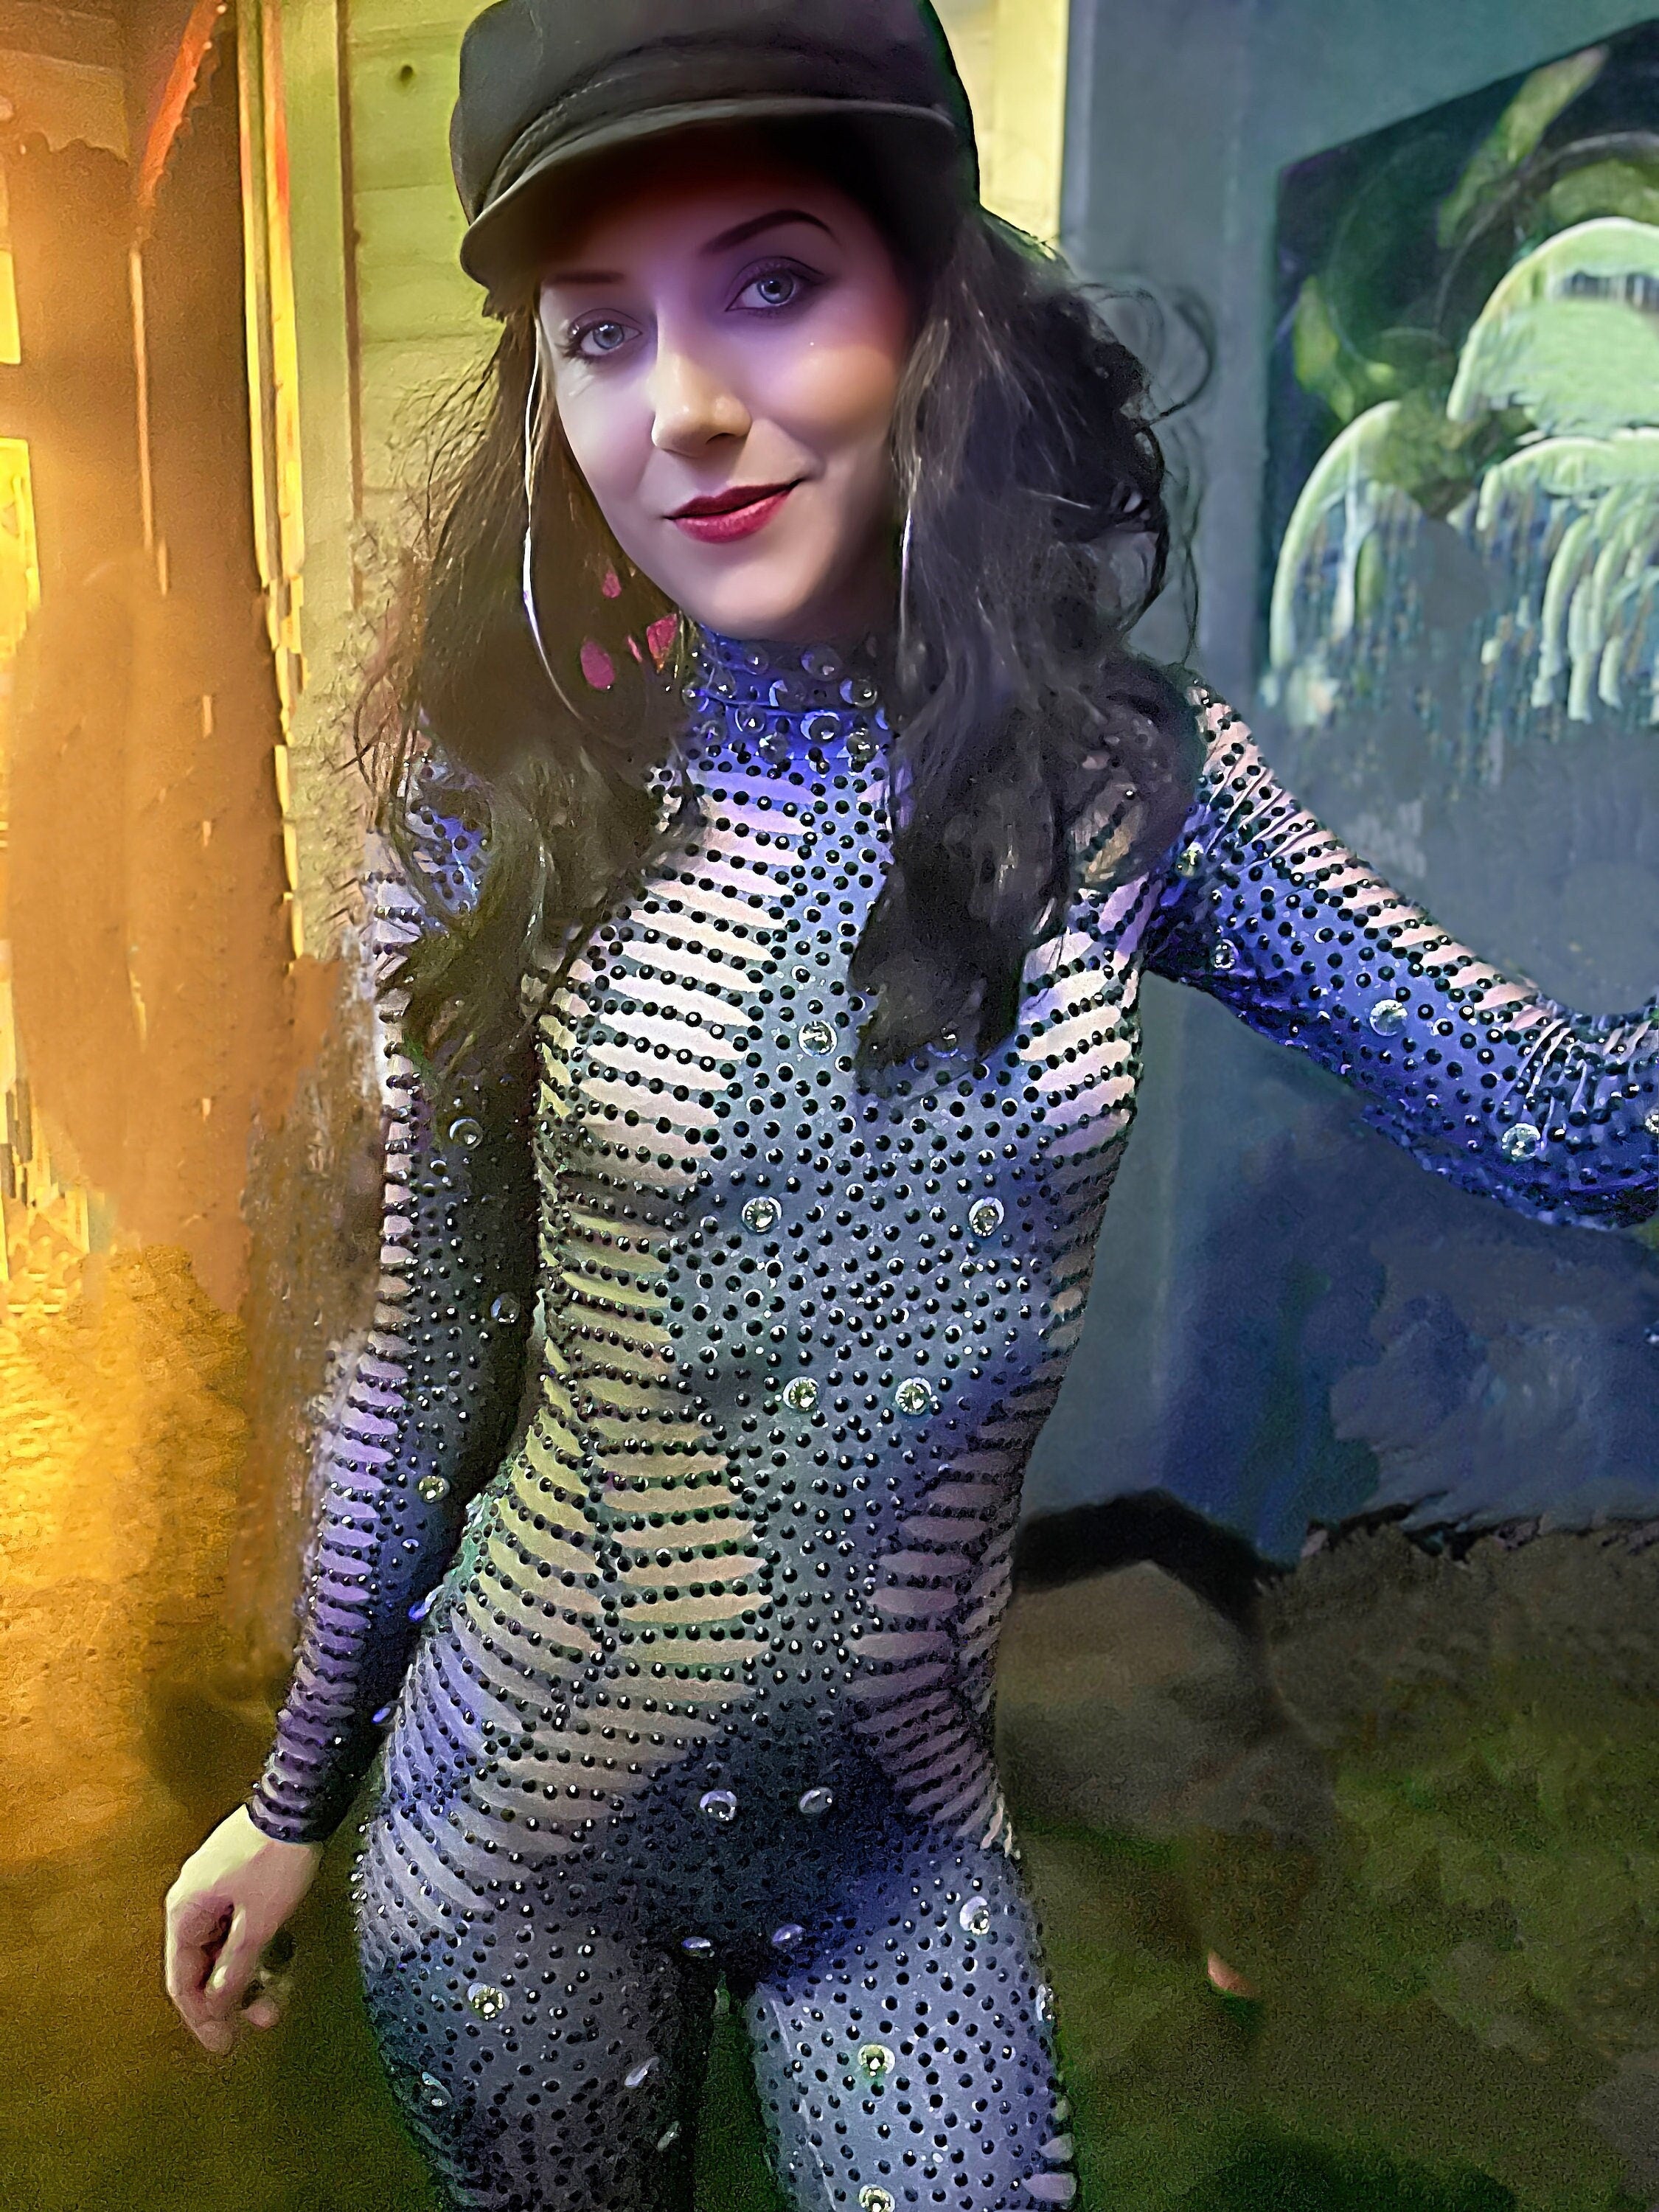 Kira Rhinestone Bodysuit / Black Diamond Party Dress Festival Outfit / Sexy Rave Crystal Catsuit / Burning Man Stage Performer Disco Costume